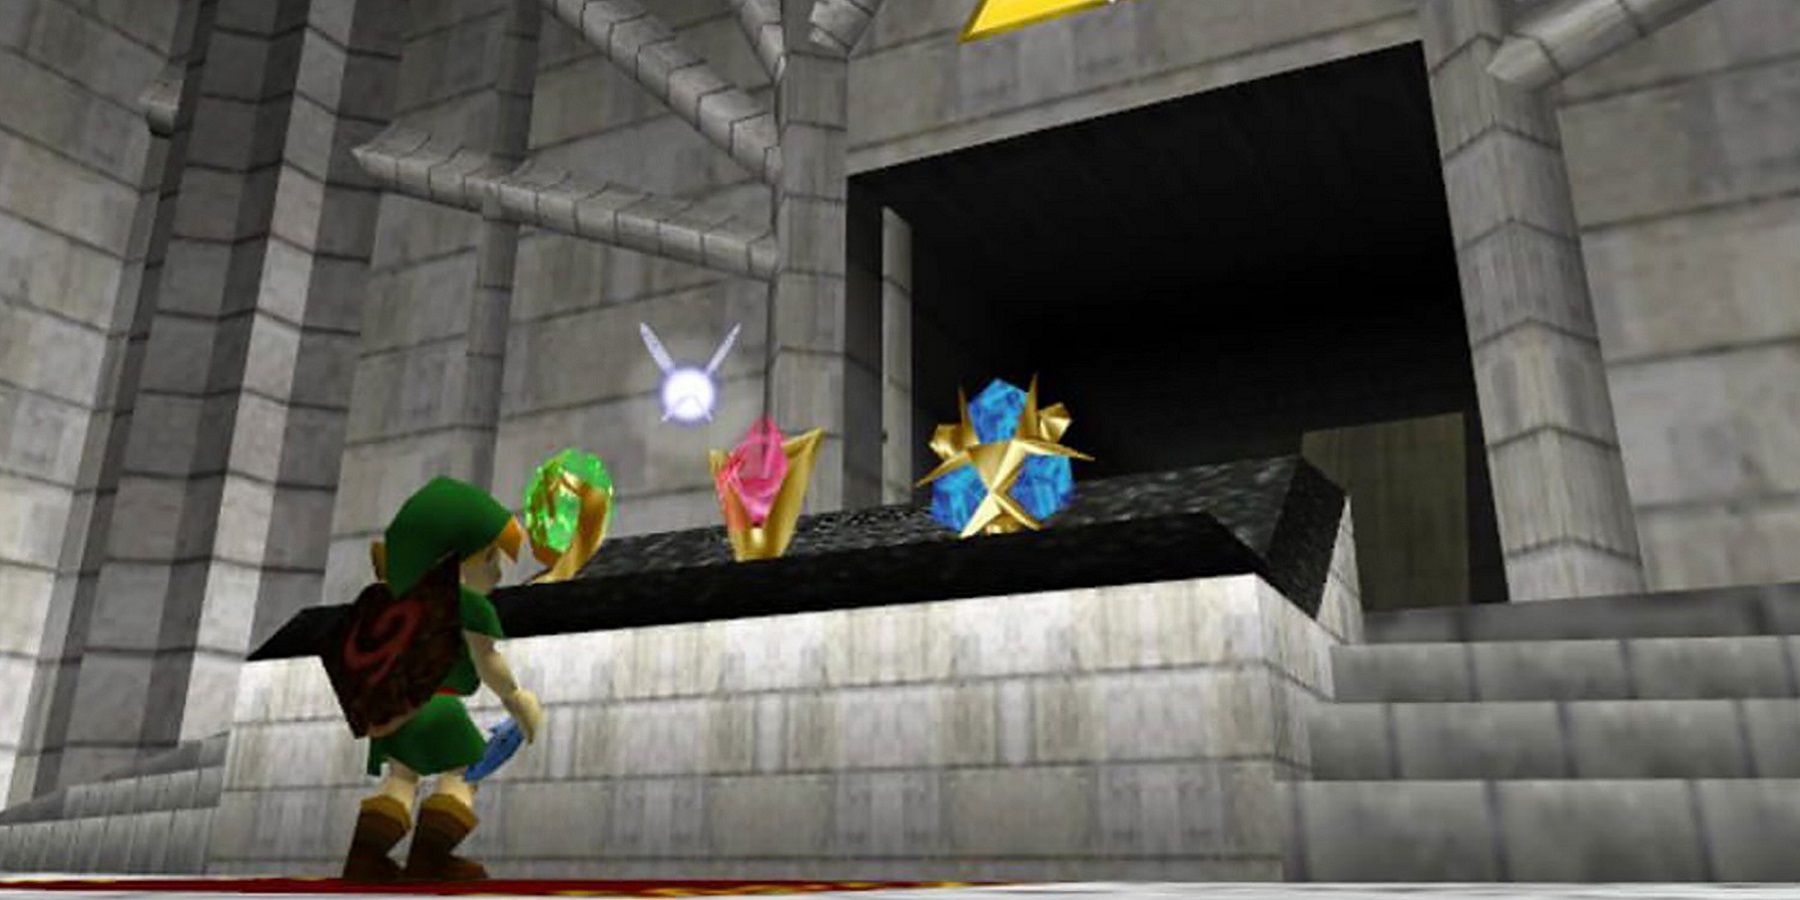 Image from Ocarina of Time on the Nintendo 64 showing young Link inside a temple.